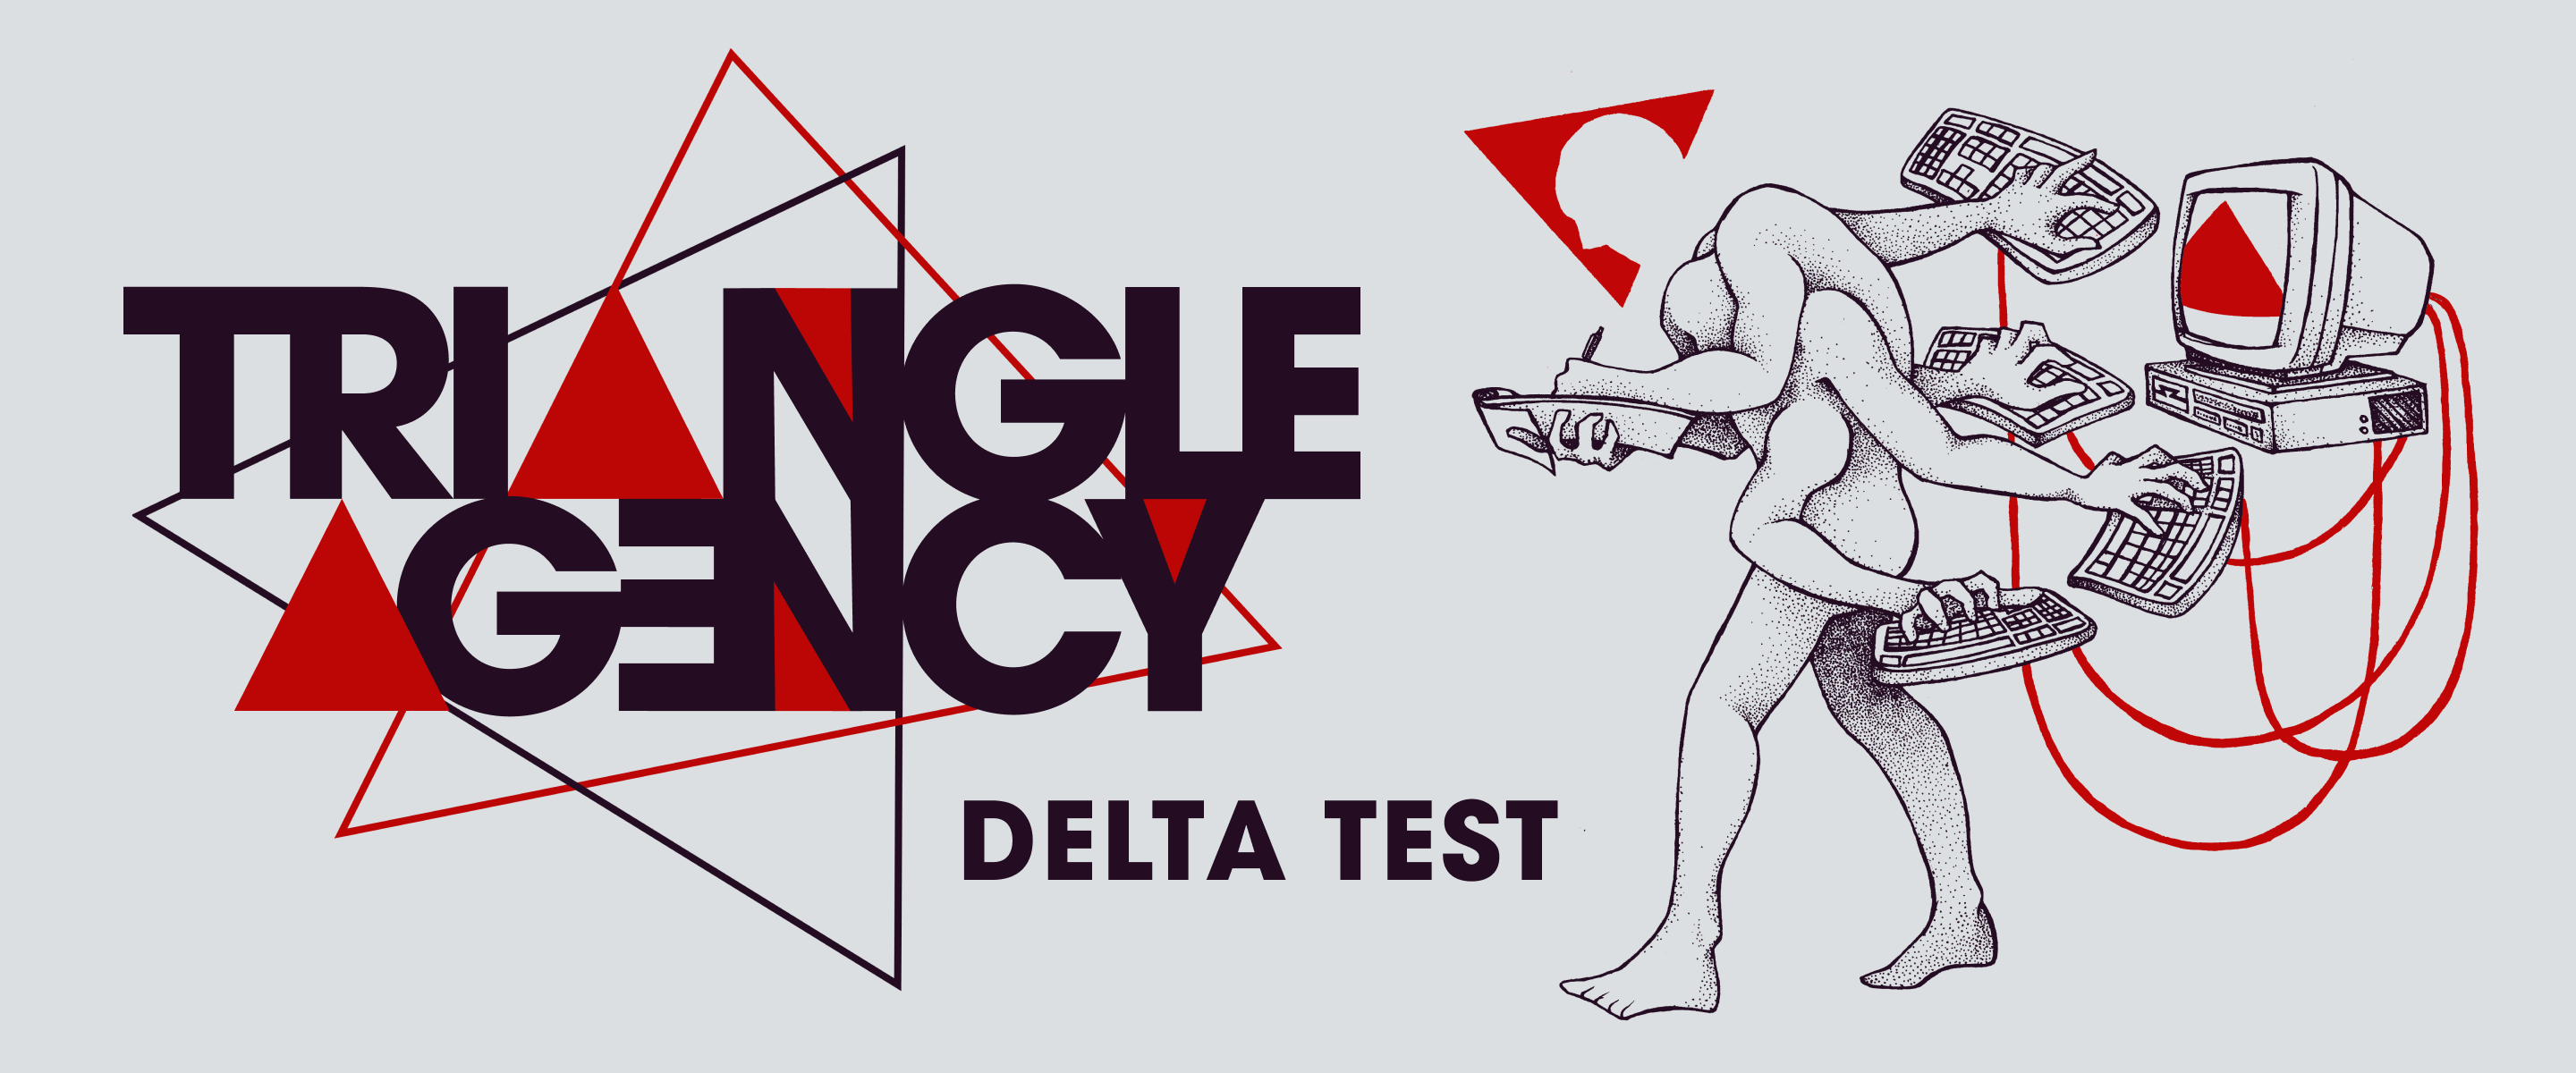 Triangle Agency Delta Test